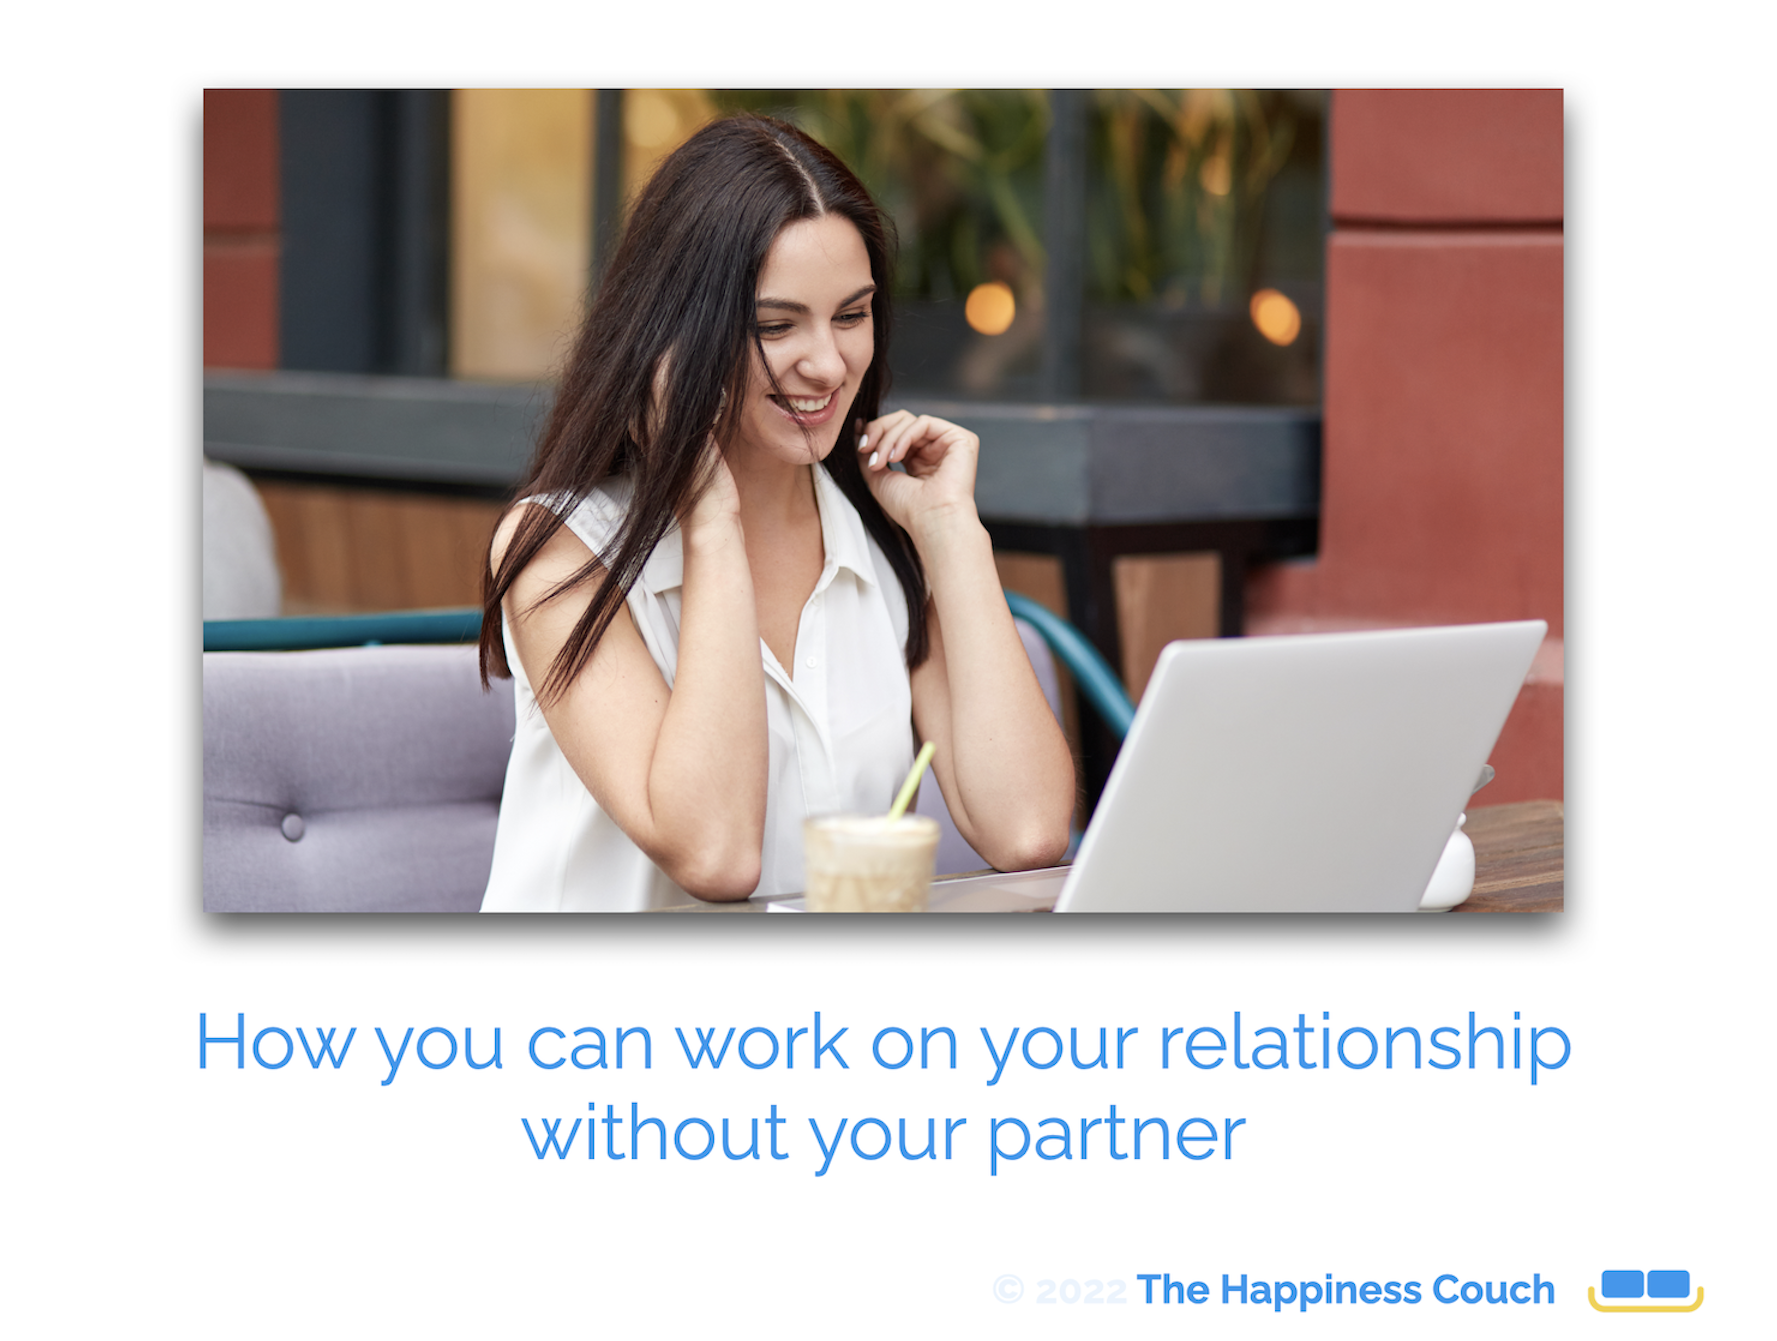 How to work on your relationship without your partner